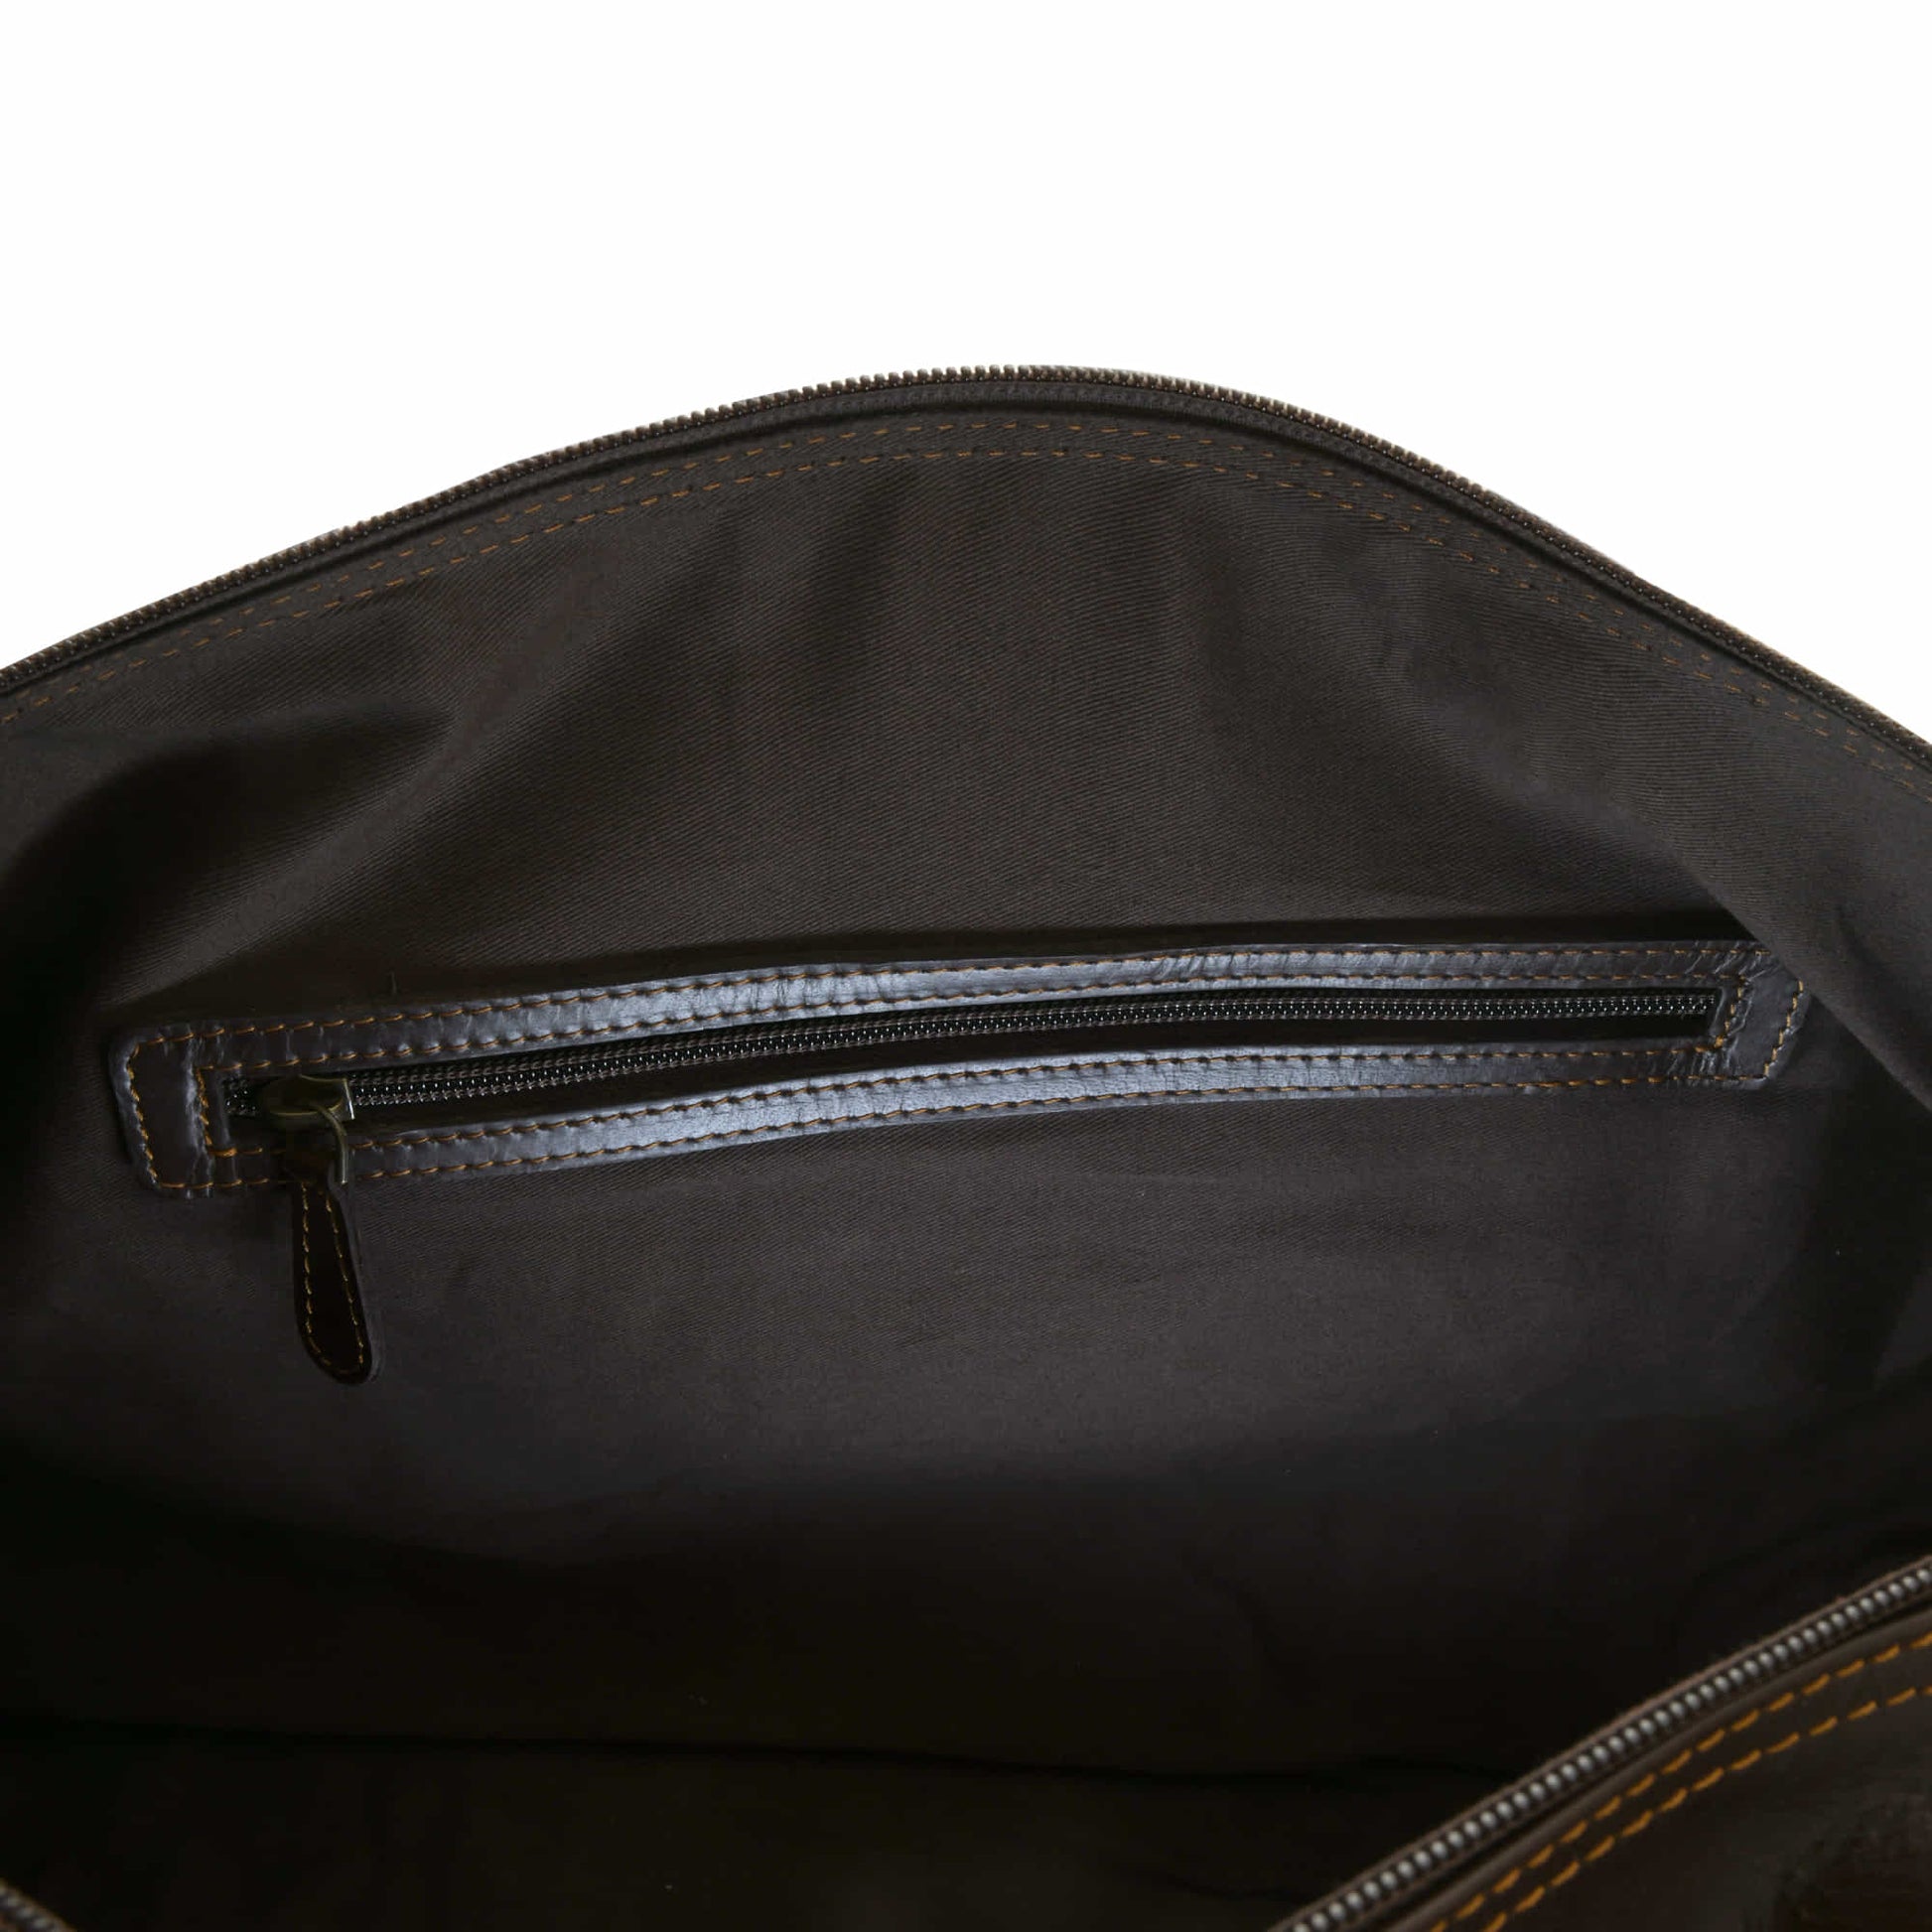 Style n Craft 392101 Duffle Bag in Full Grain Dark Brown Leather - View of the Interior Zipper Pocket